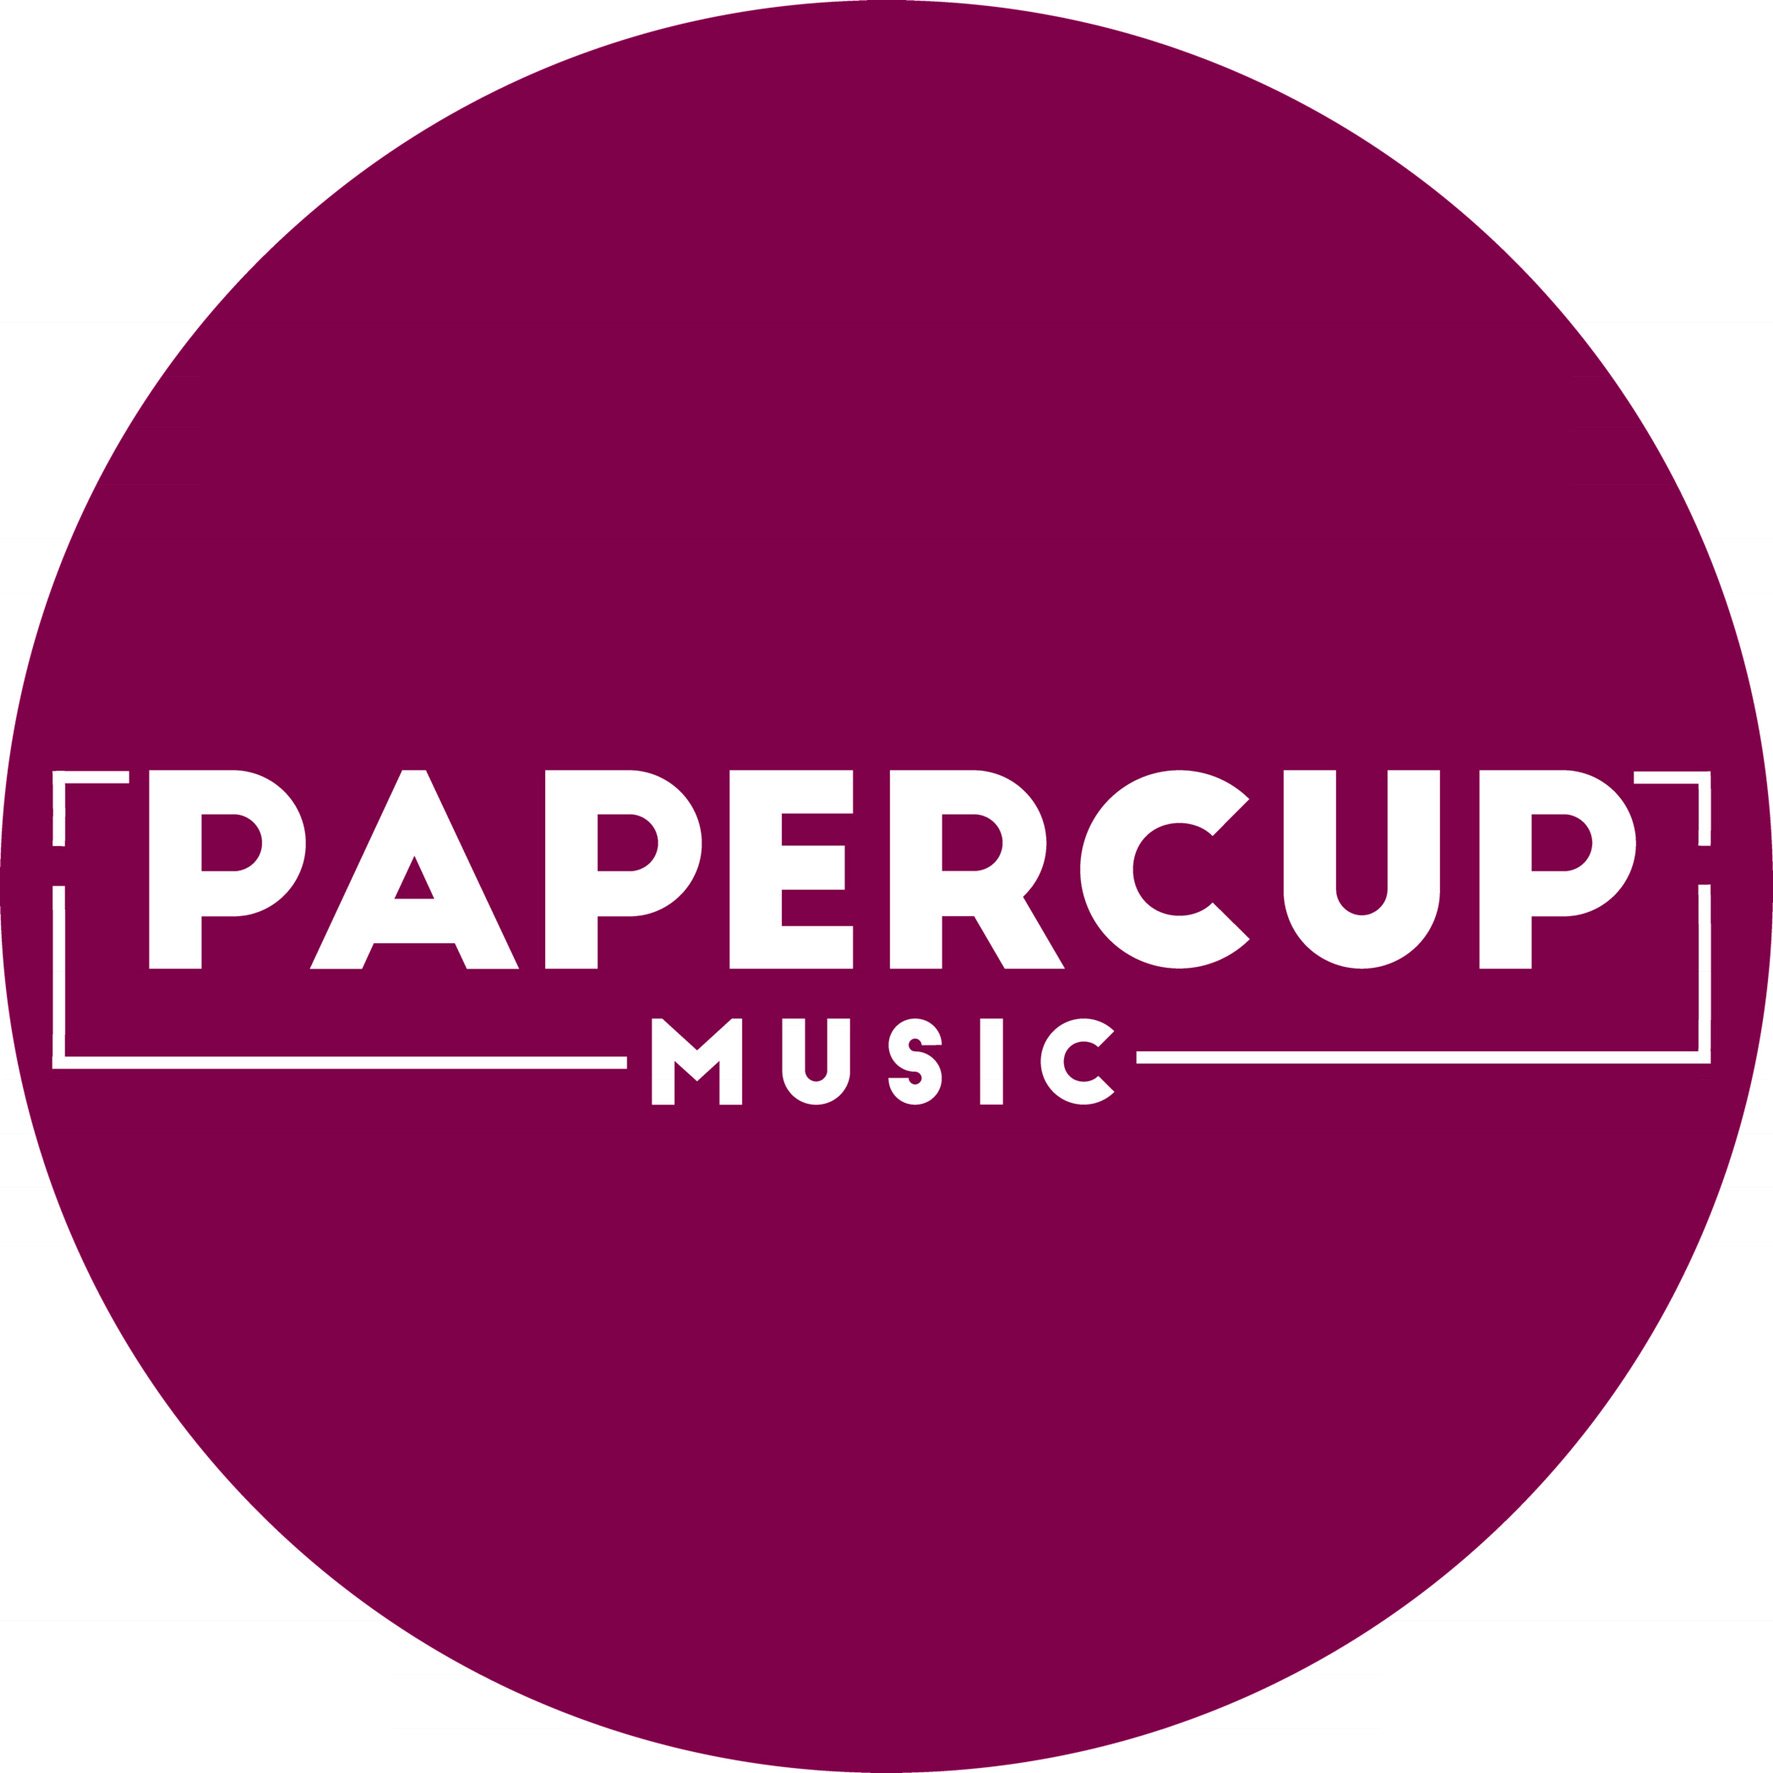 BK Born :: UK Inspired :: VT Based ~ Bespoke independent record label. We put out music by artists we like. Hit us up at info@papercupmusic.com